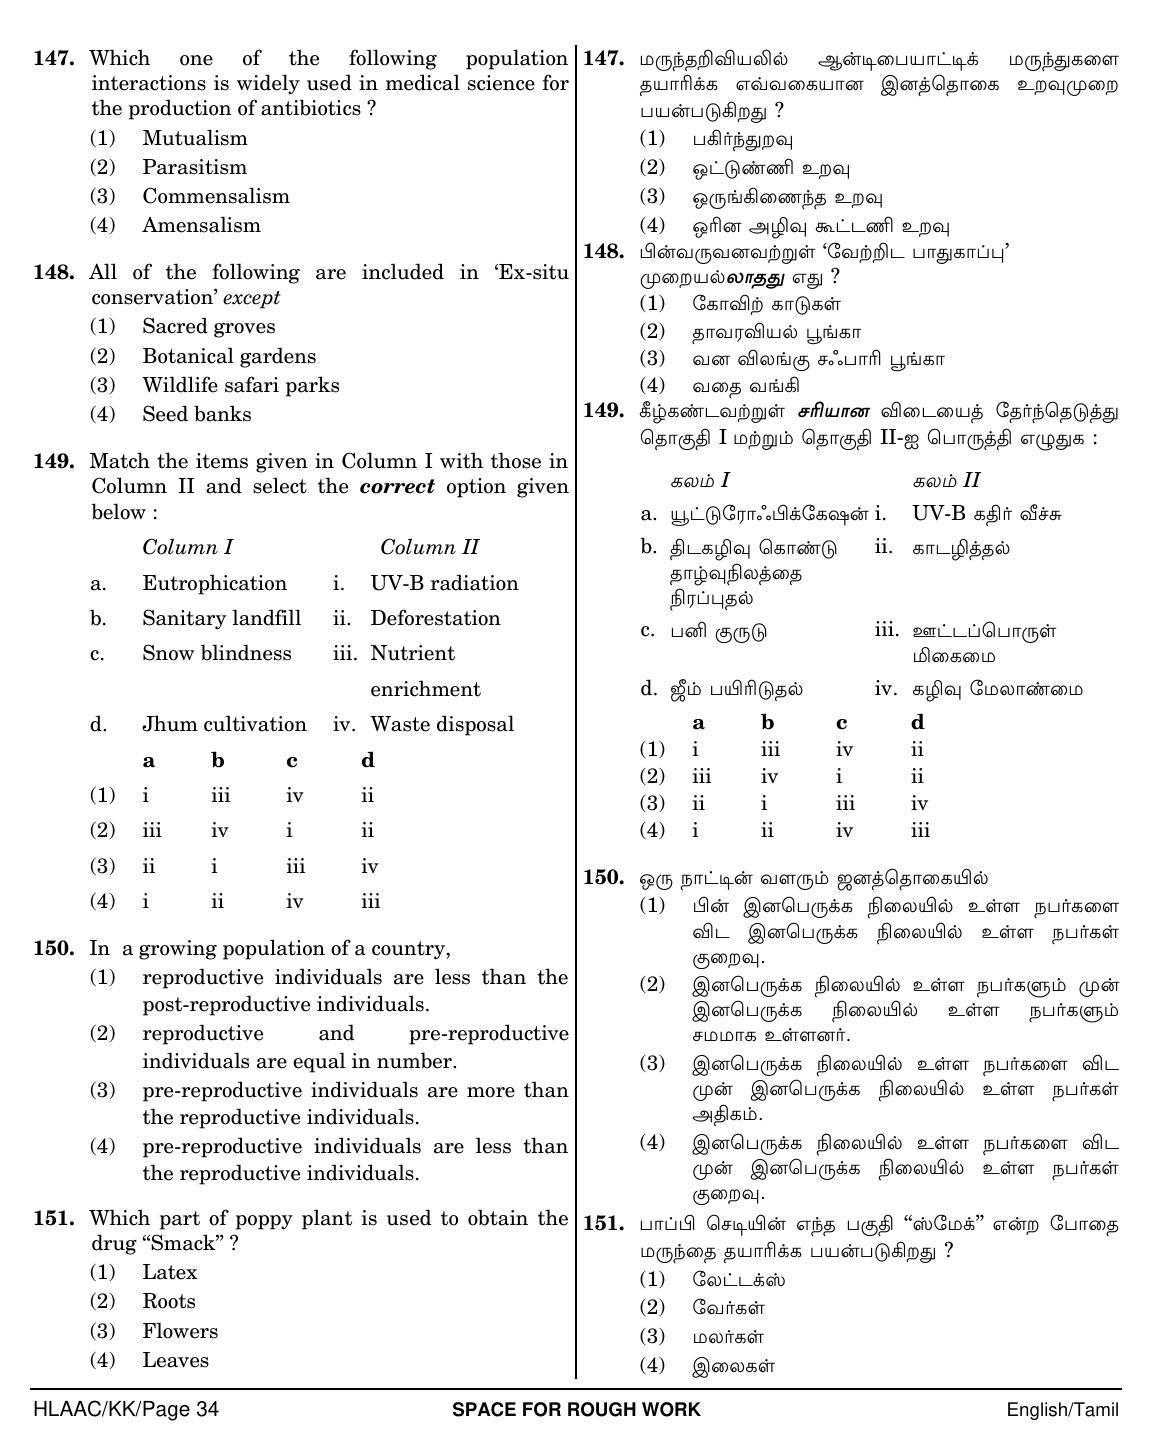 NEET Tamil KK 2018 Question Paper - Page 34